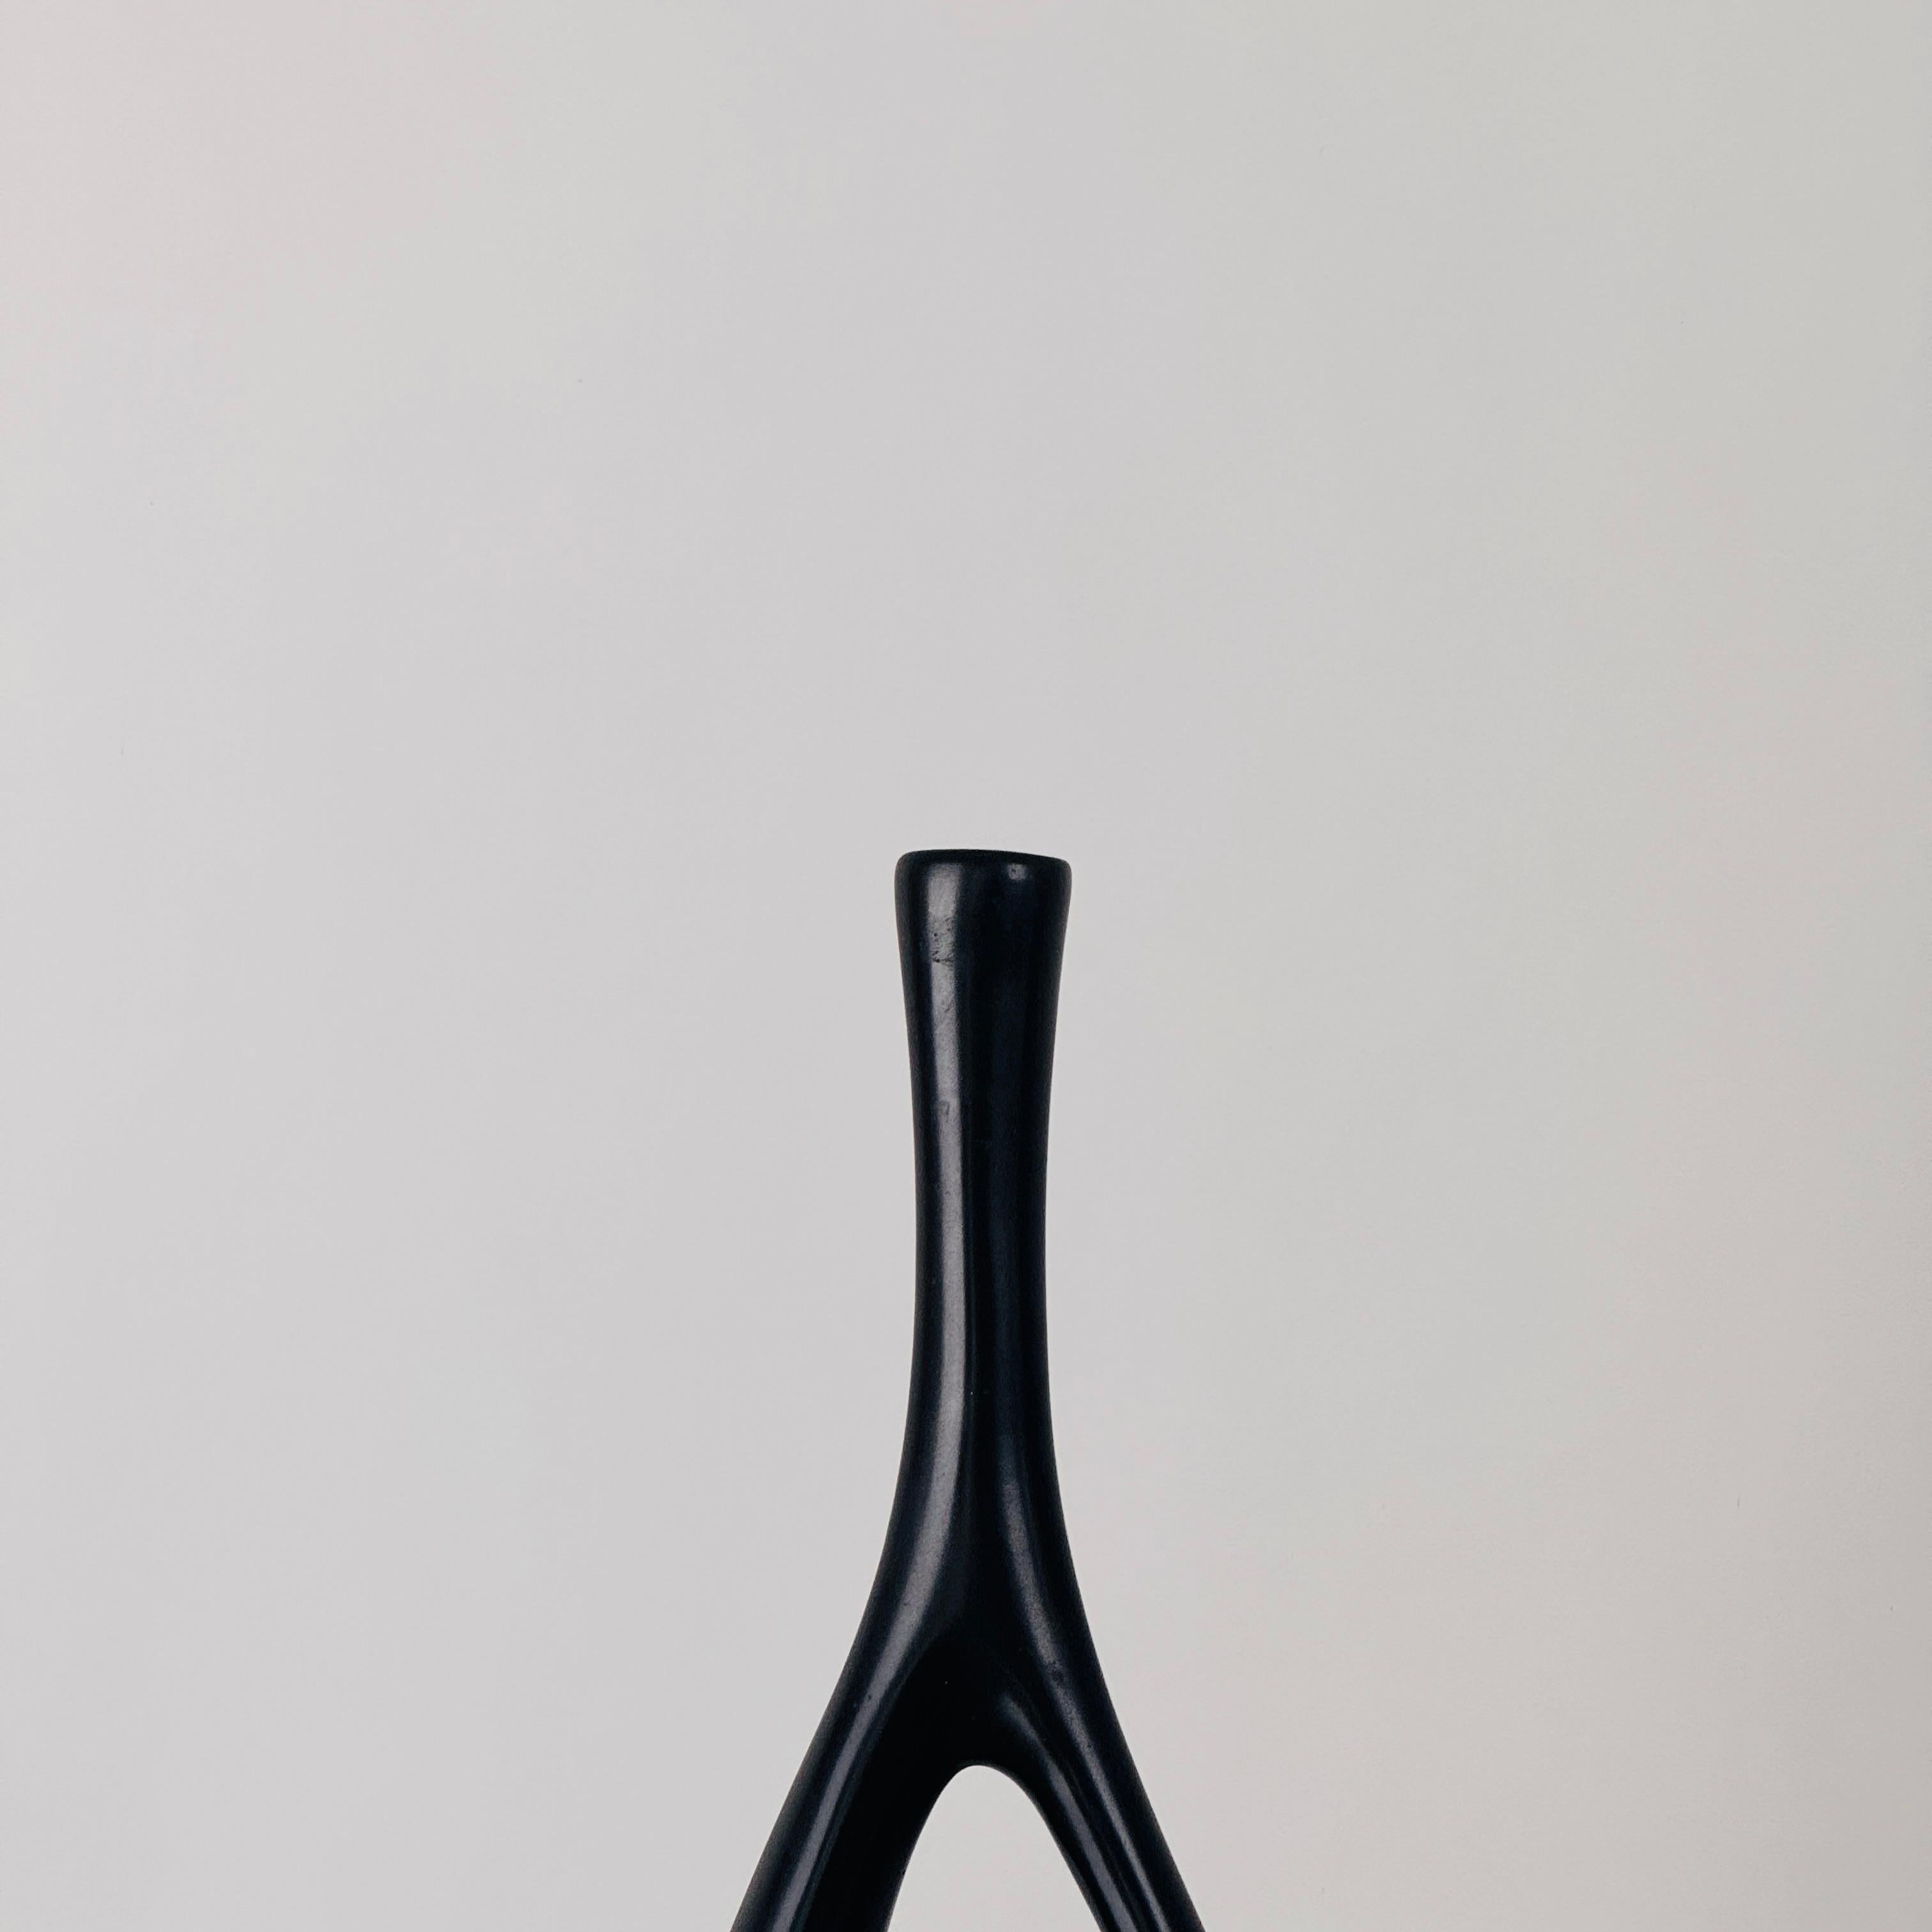 Large soliflore vase with black ceramic handle by Jean André Doucin, circa 1950. 2